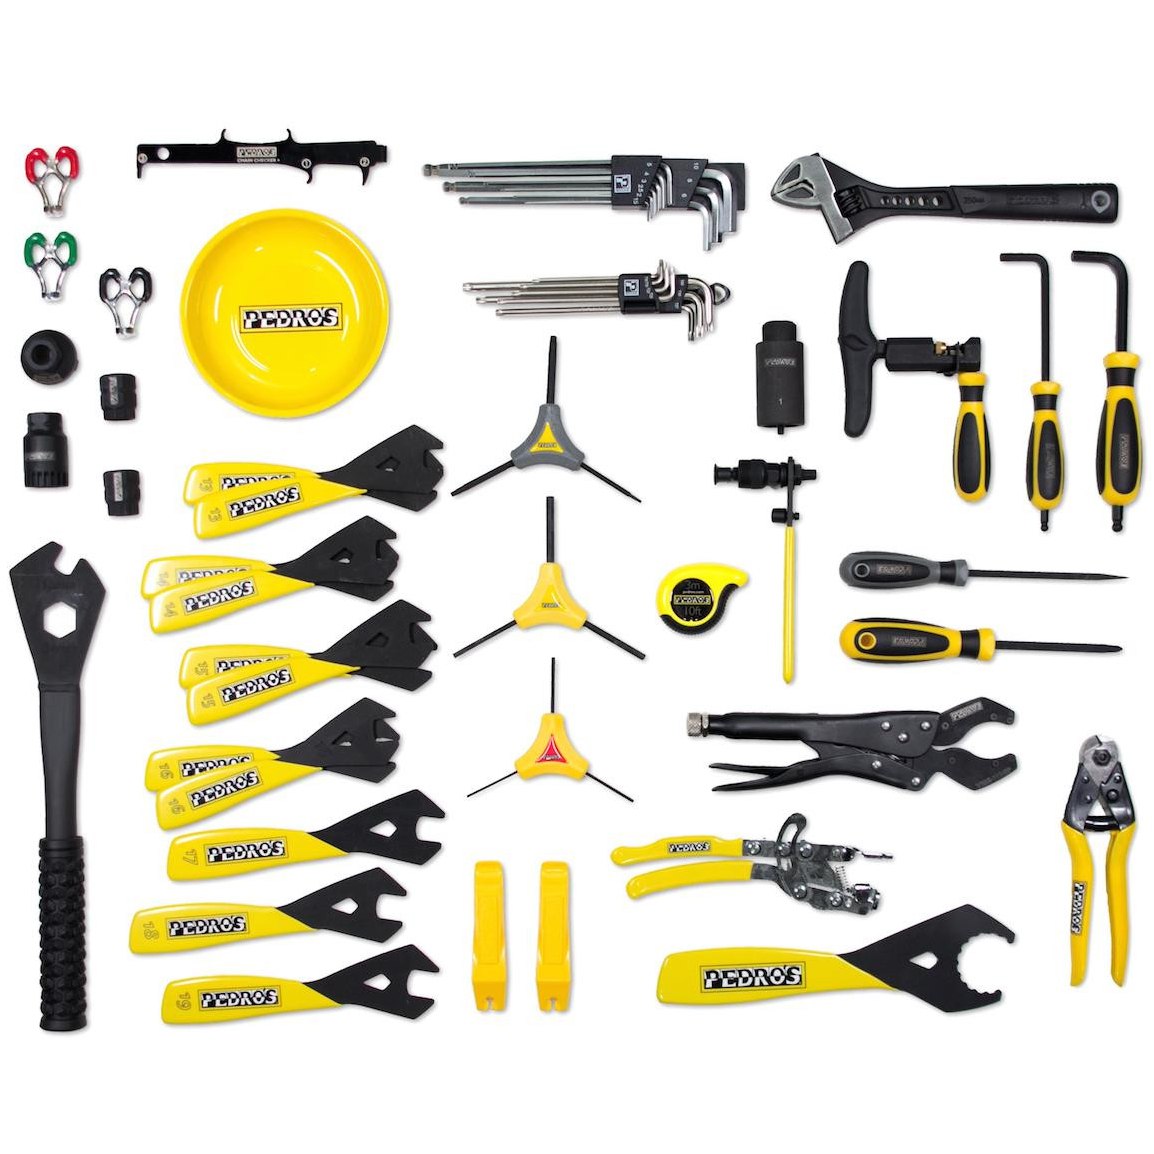 Picture of Pedro&#039;s Apprentice Bench Tool Kit